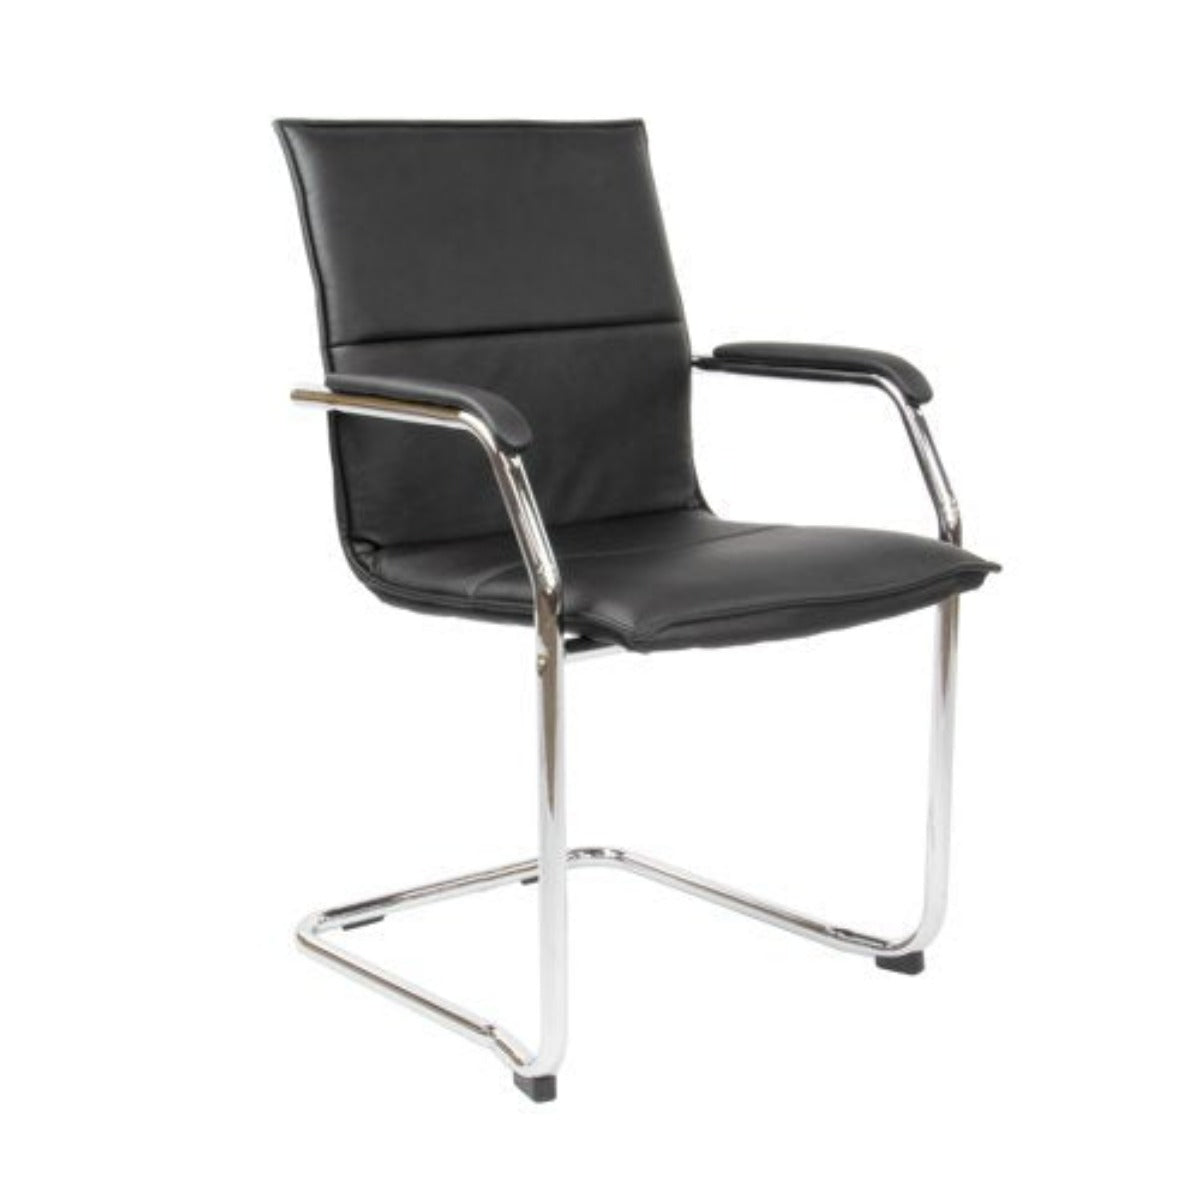 Essen stackable meeting room cantilever chair - black or grey faux leather   12/04/21